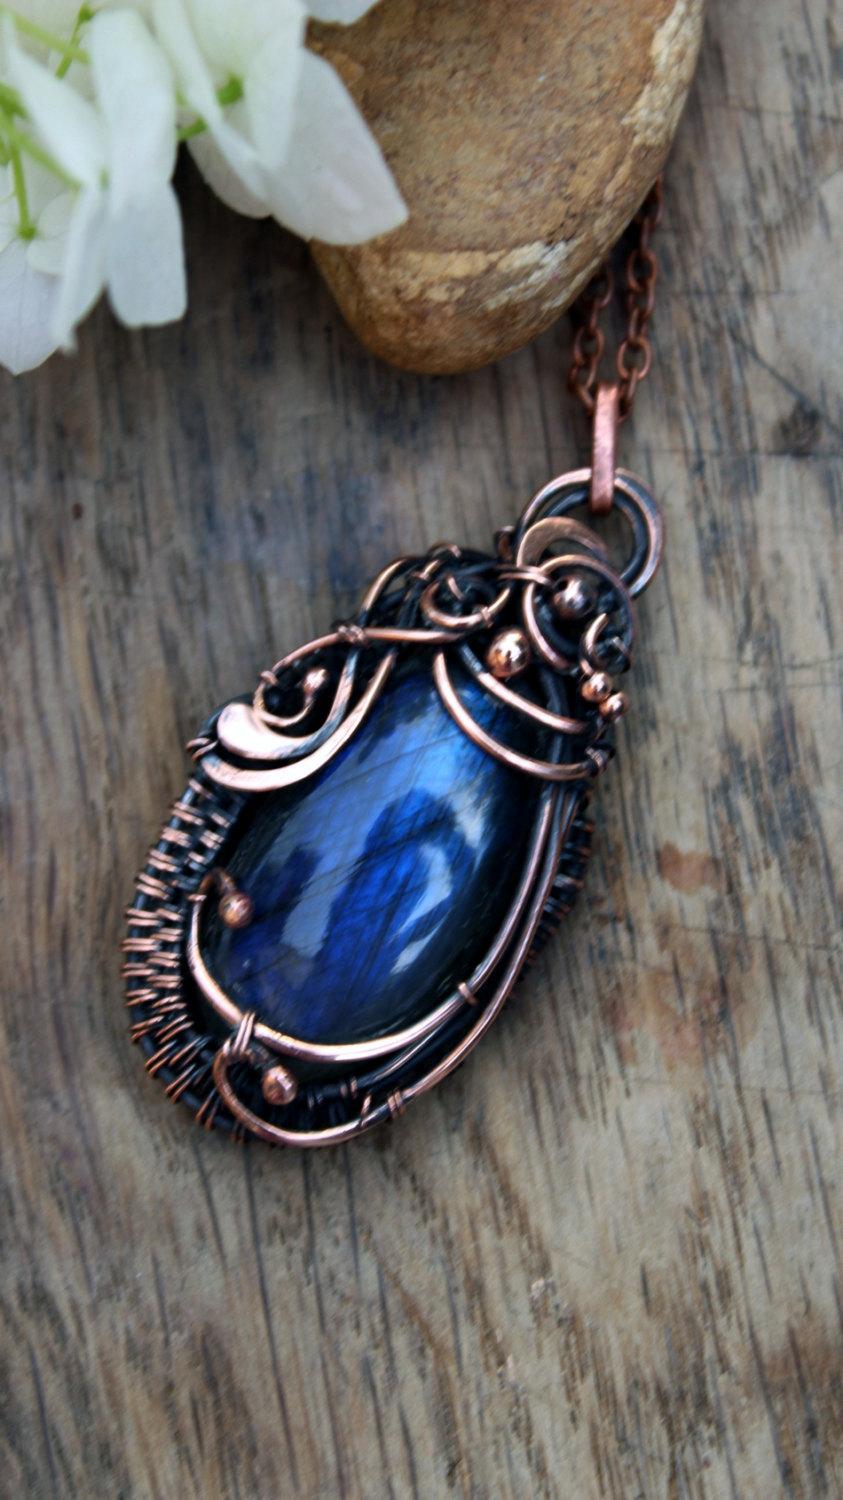 Mariage - Labradorite Pendant Wire wrapped pendant Copper pendant necklace Inspirational necklace Wife gift for her Wire necklace stone pendant